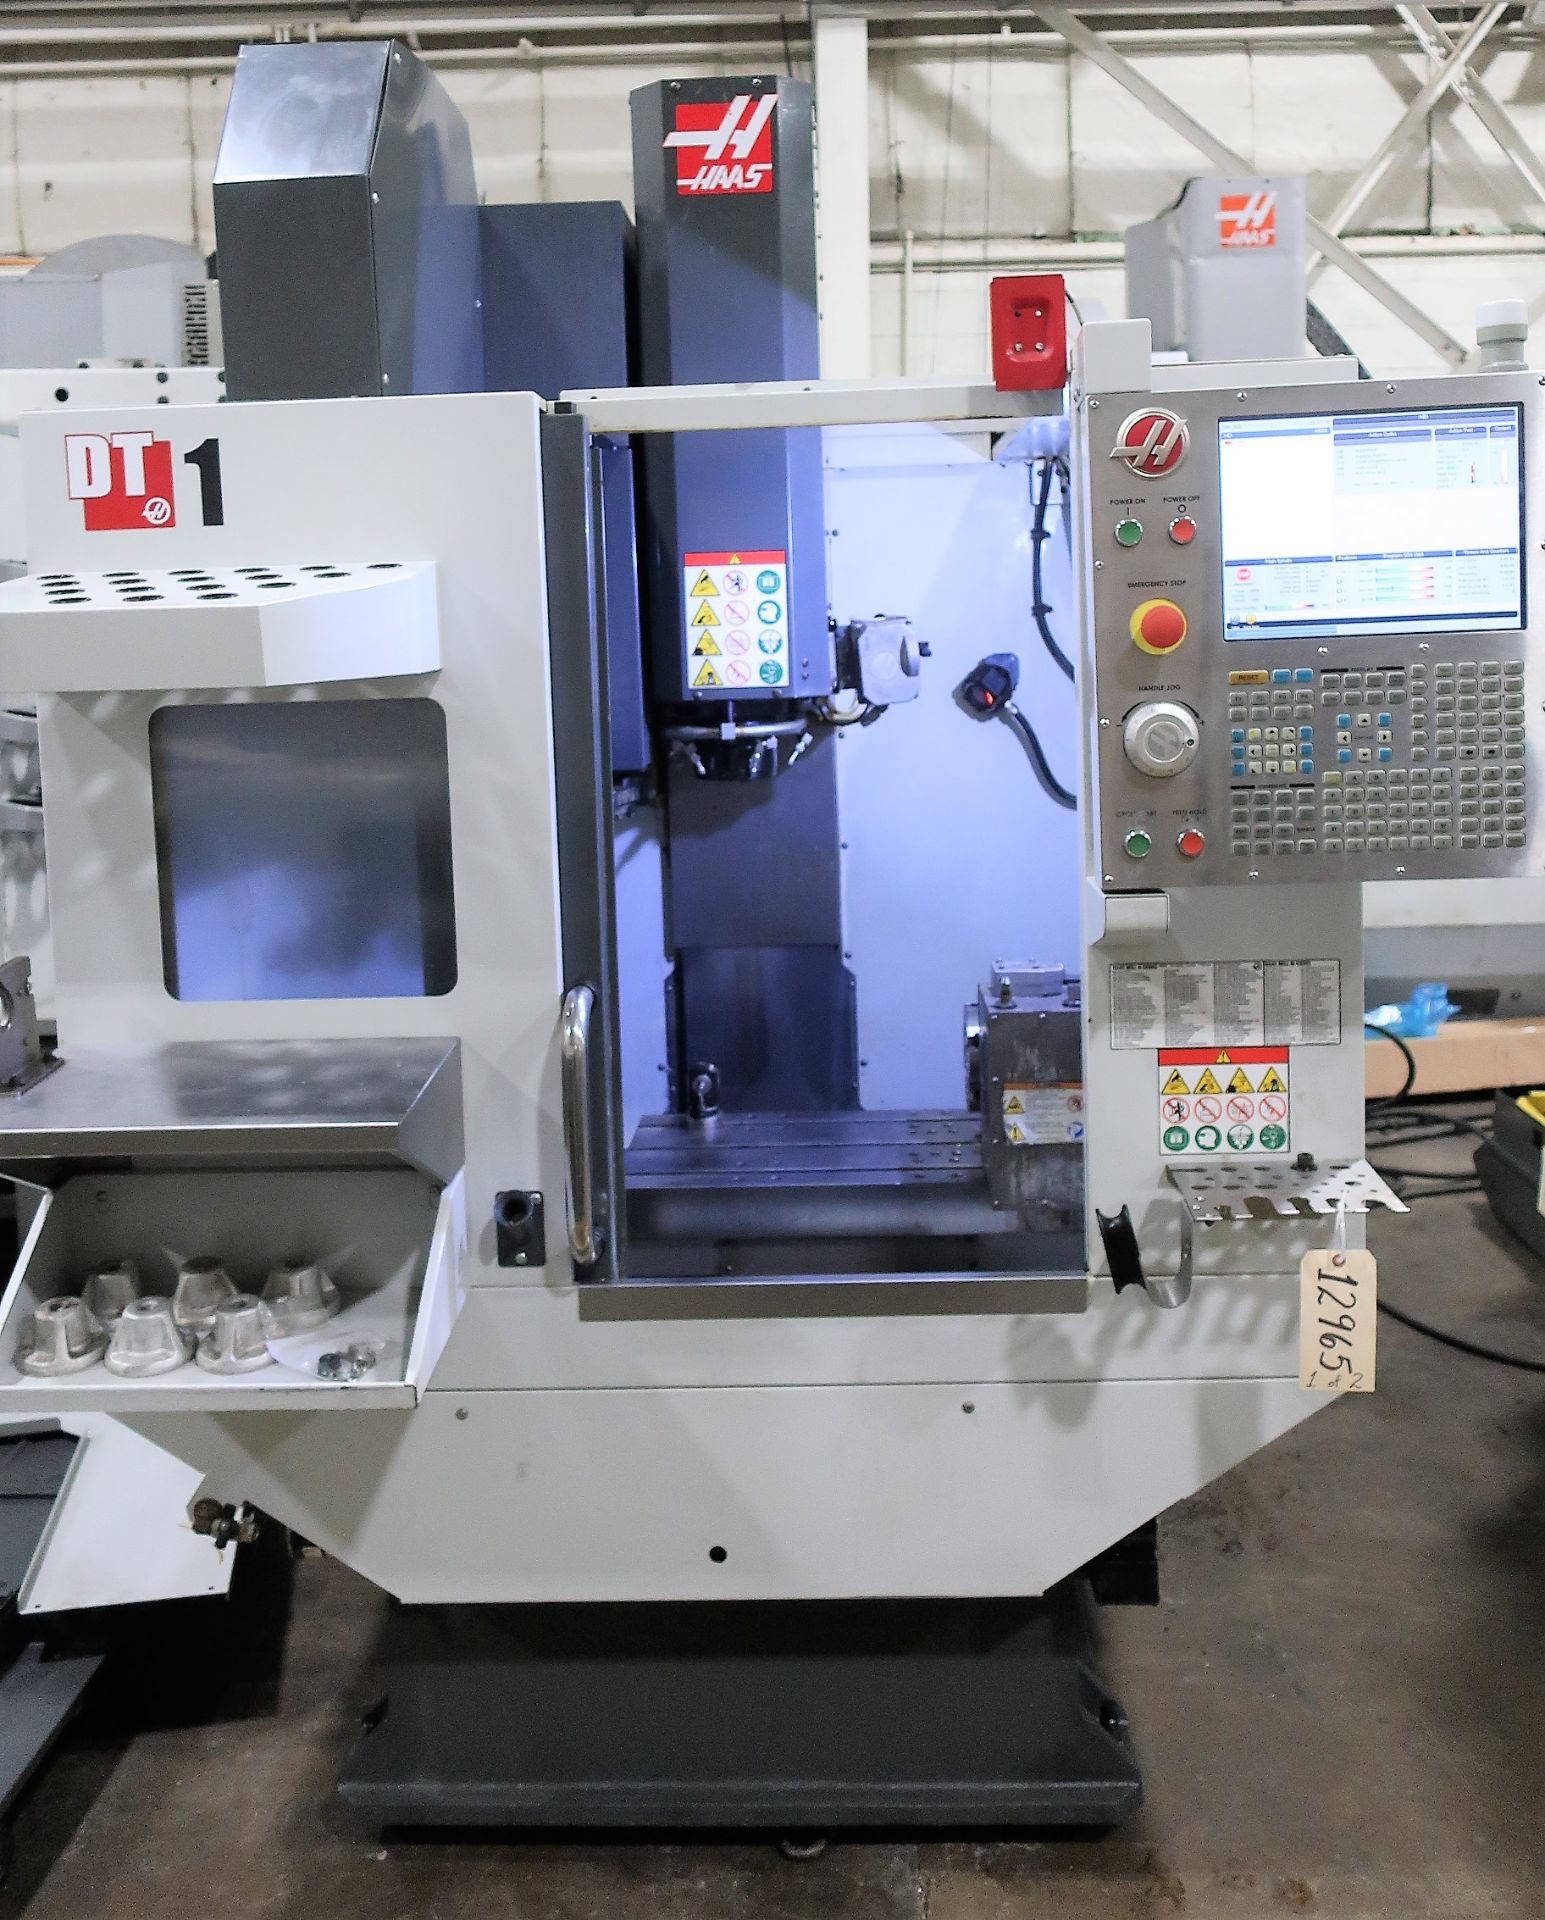 HAAS DT-1 4-AXIS CNC DRILL/TAP/VERTICAL MACHINING CENTER, S/N 1132186, New 2016